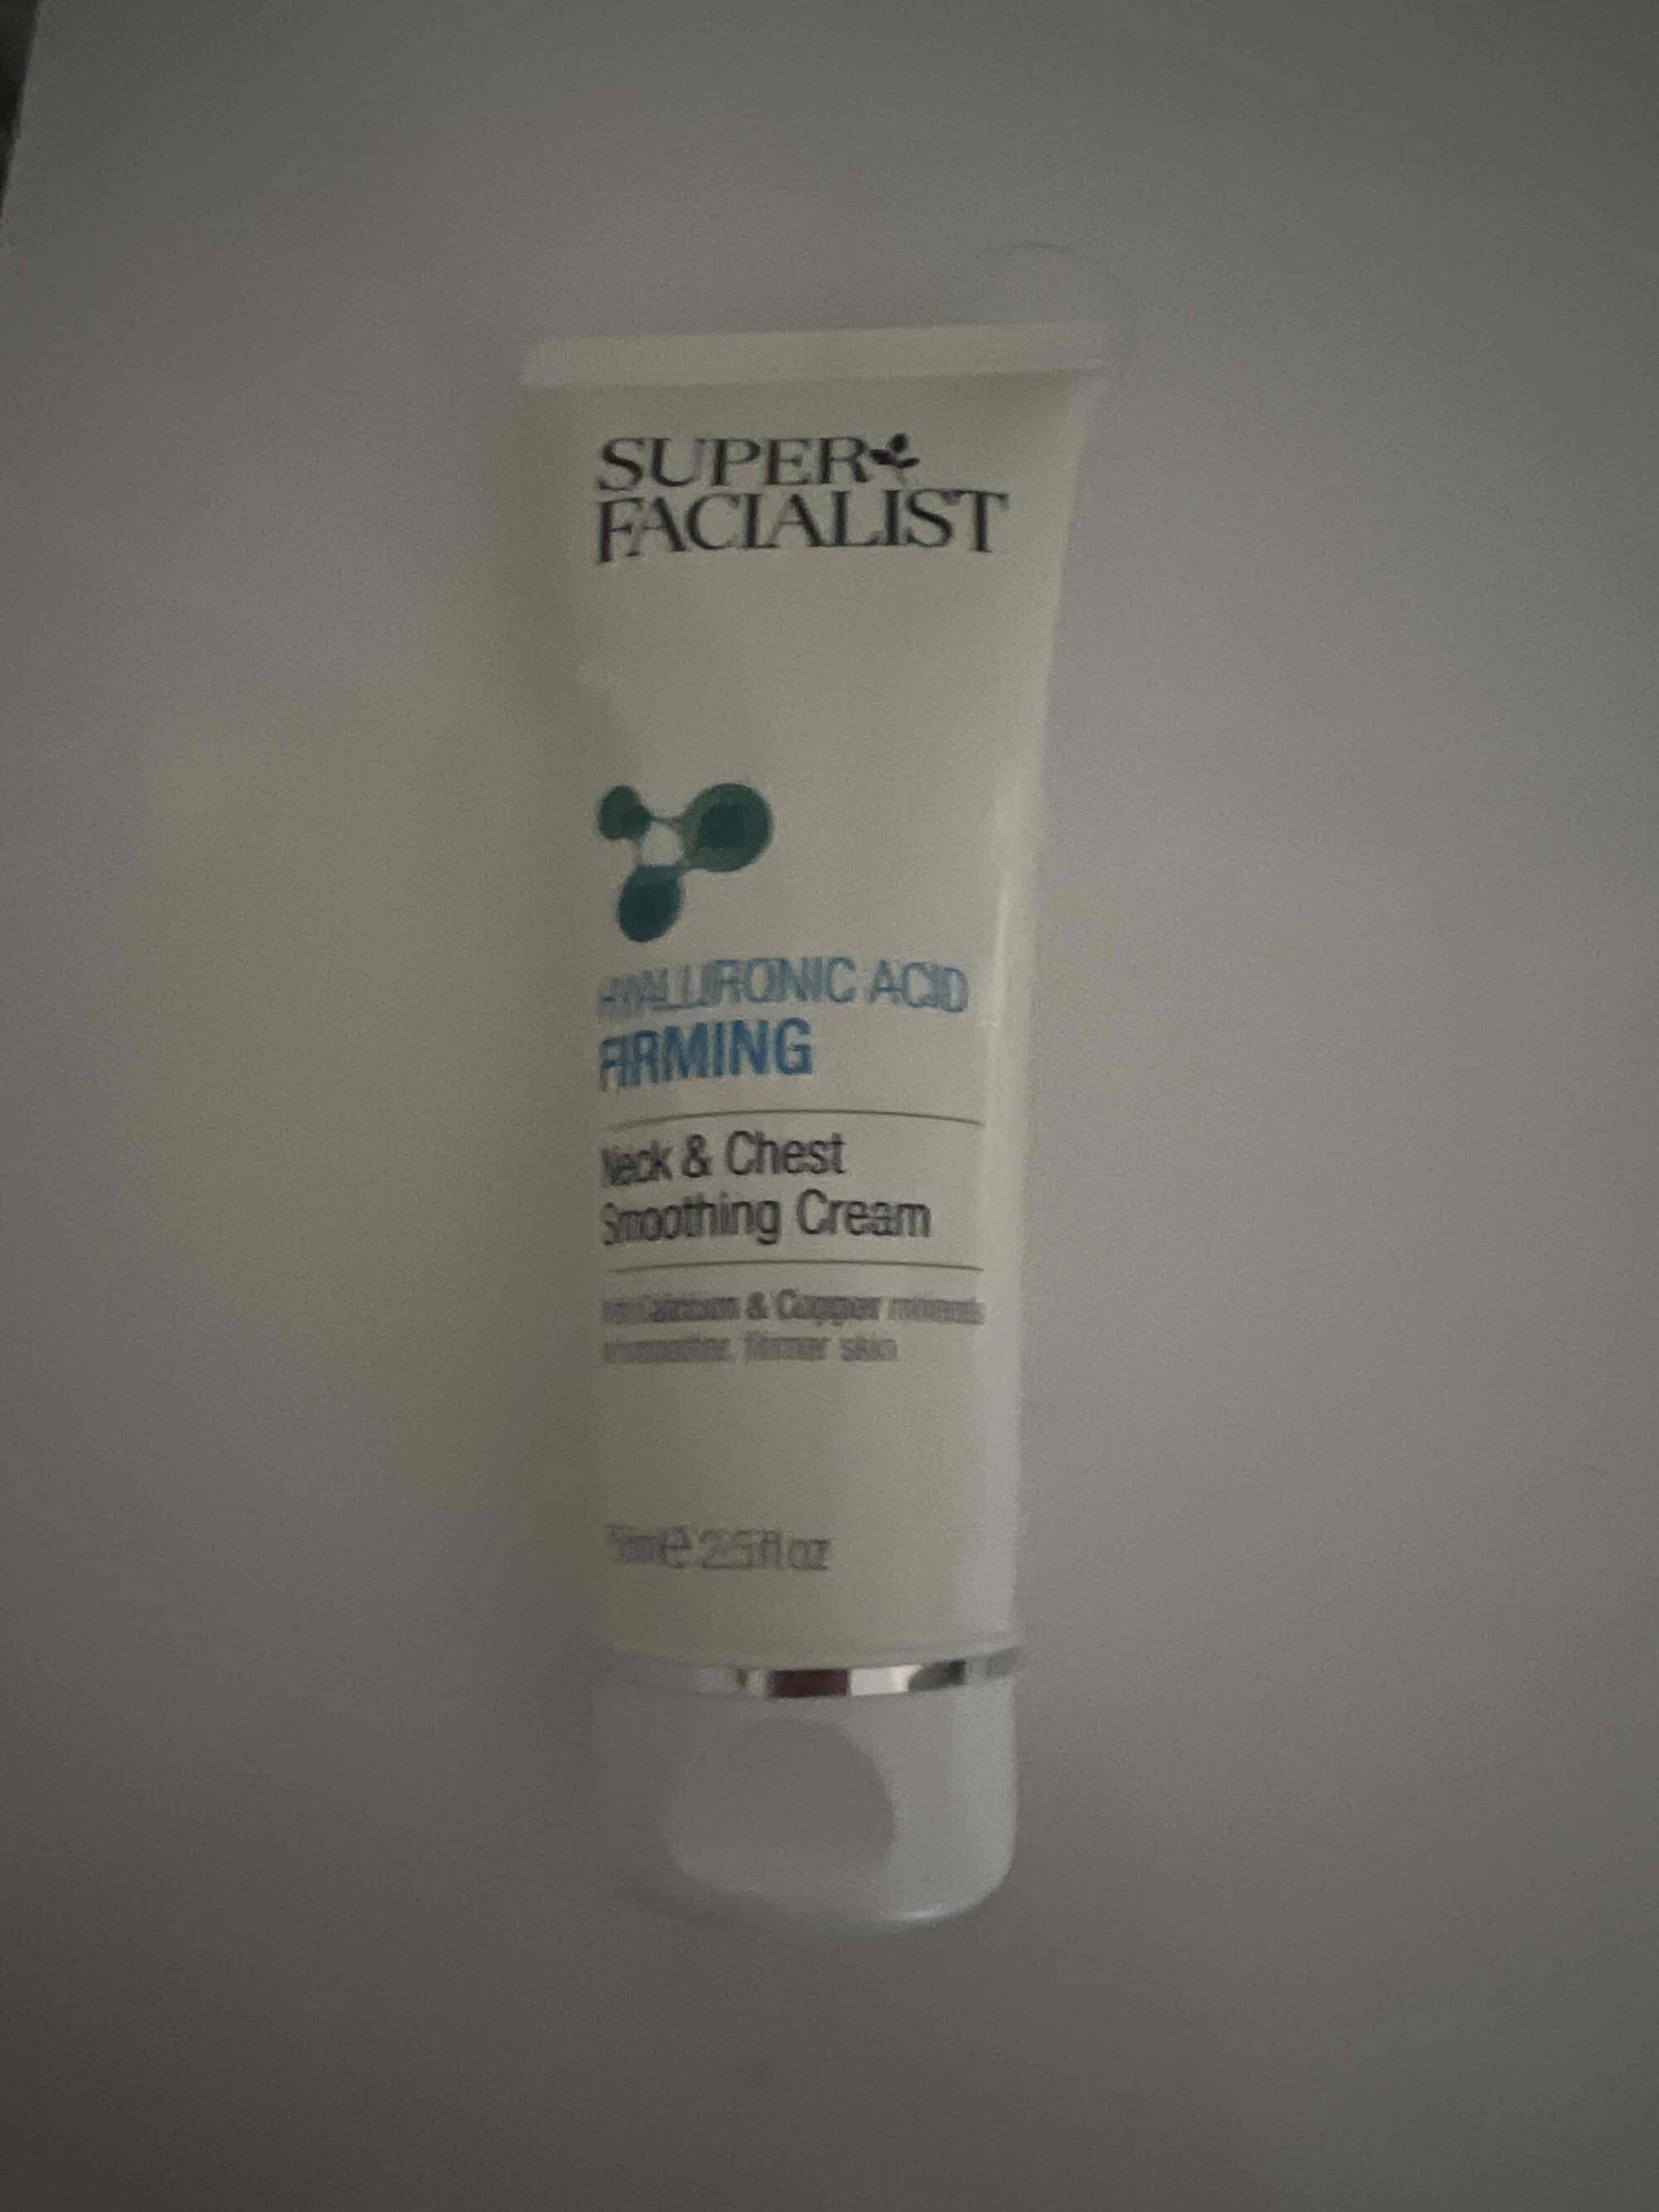 SUPER FACIALIST - Firming - Neck & chest smoothing cream